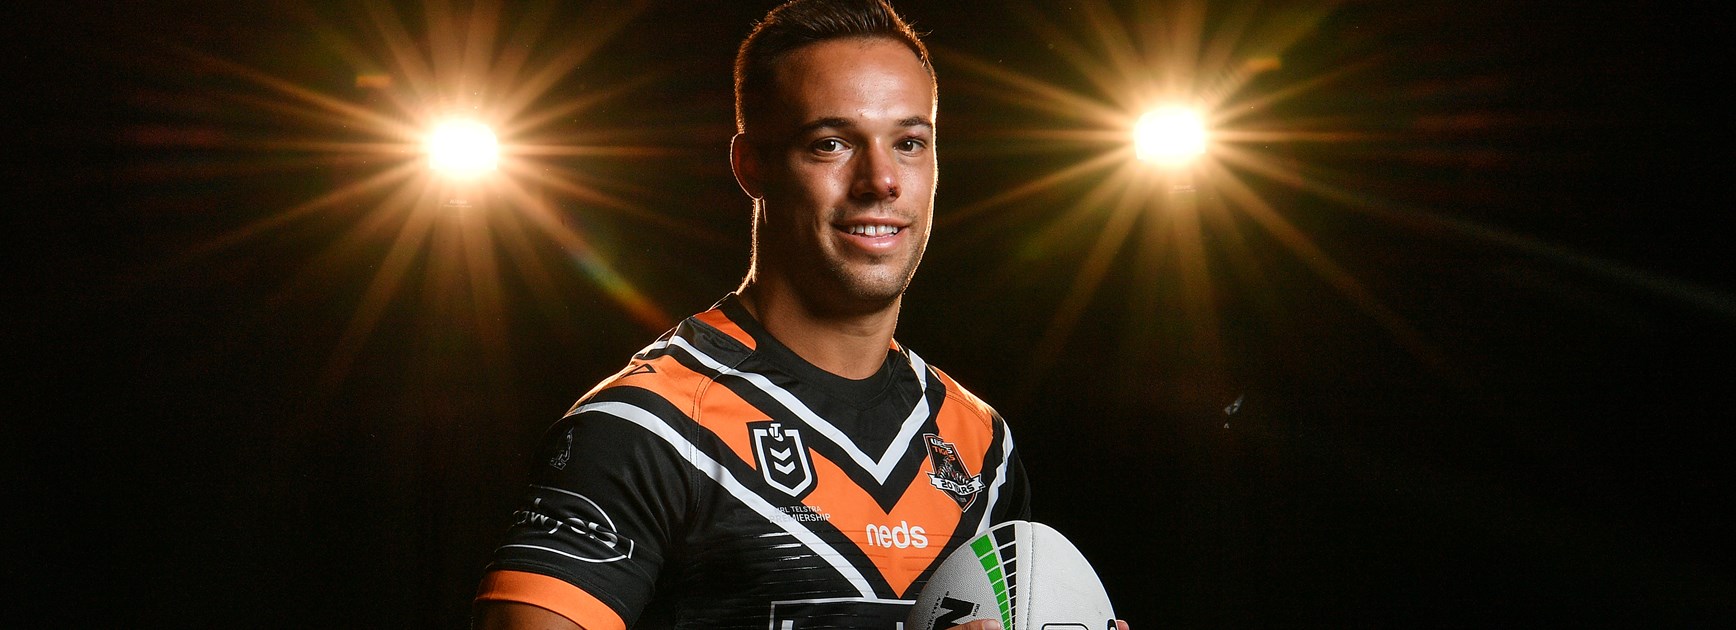 Wests Tigers out to put best foot forward in pre-season trial